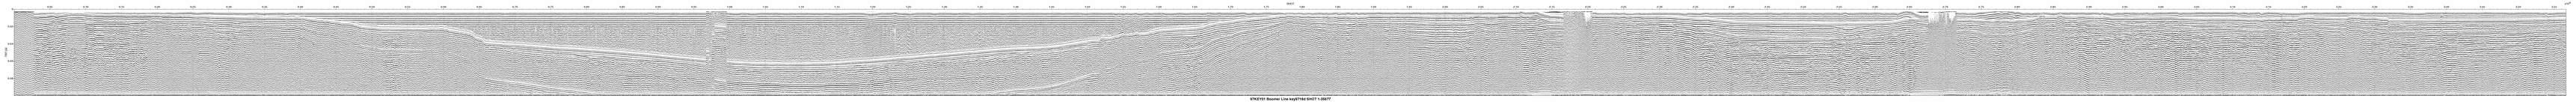 Thumbnail GIF image of the seismic trackline key9718d, with a hotlink to the more detailed, larger JPG image.